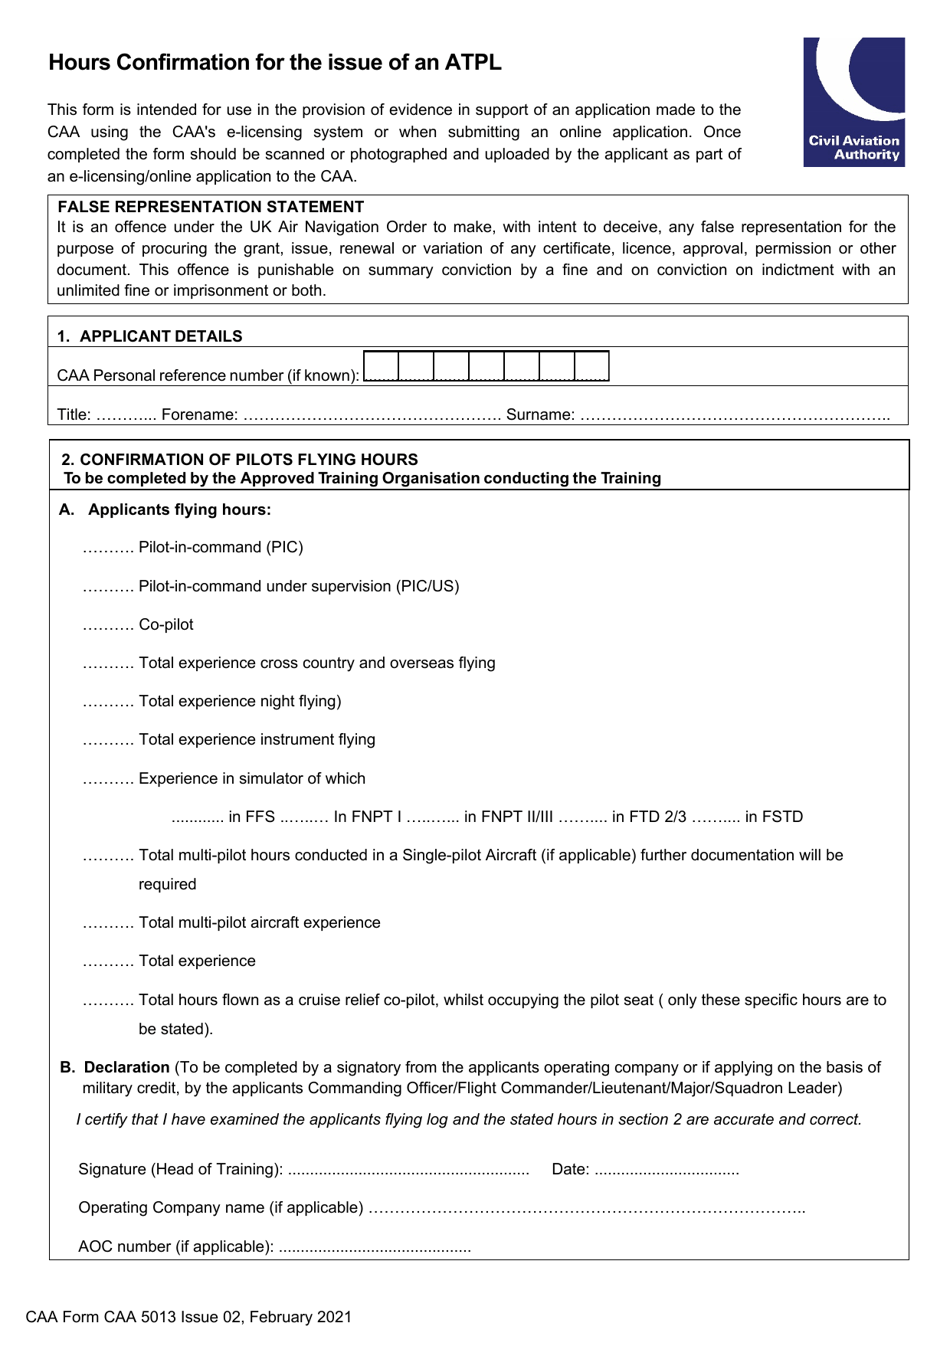 Form CAA5013 Hours Confirmation for the Issue of an Atpl - United Kingdom, Page 1